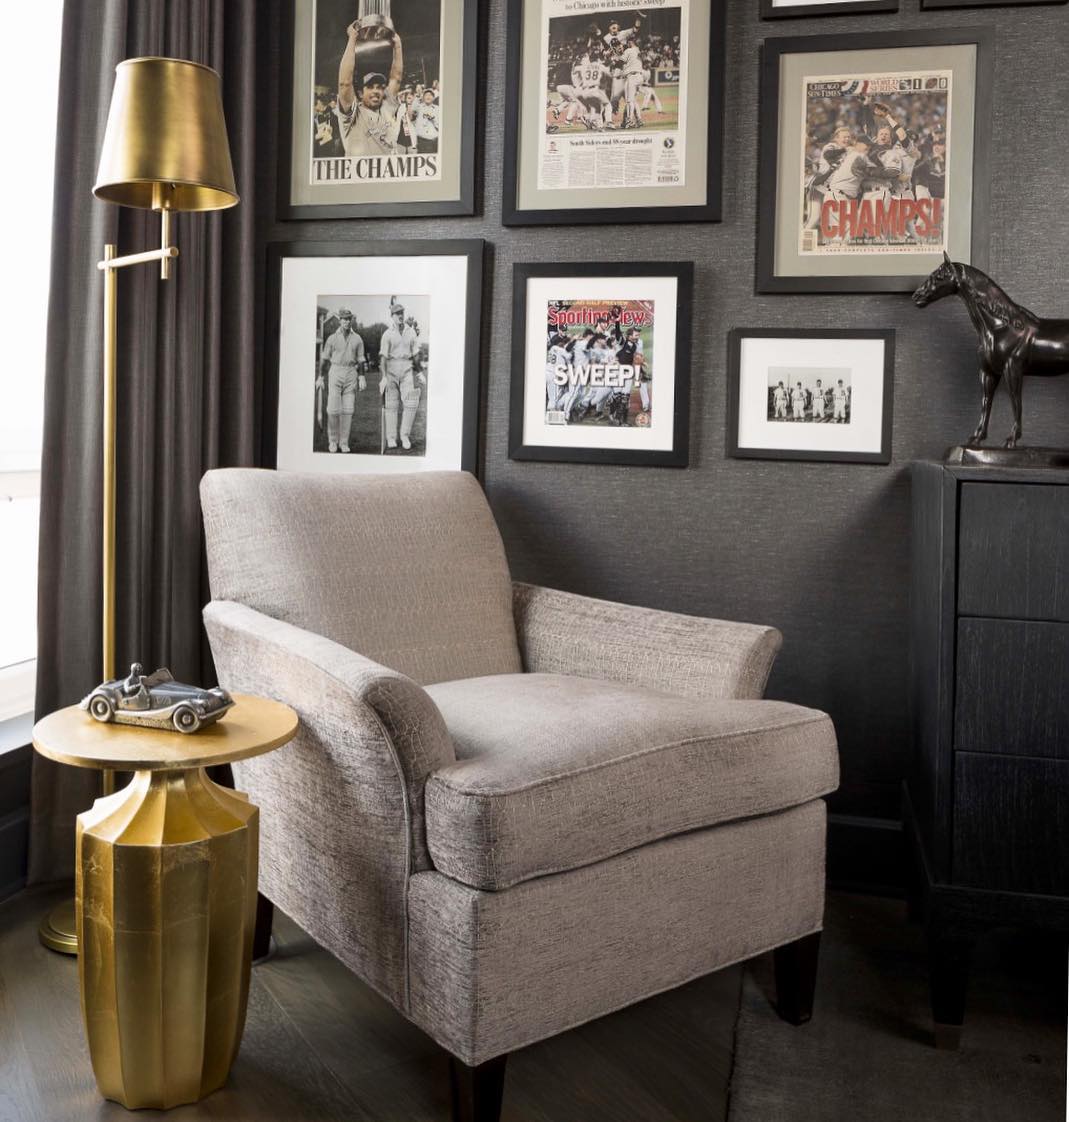 Comfy Arm Chair in Minimalistic Room with Sports Photos in Frames. Photo by Instagram user @anthonymichaelinteriors